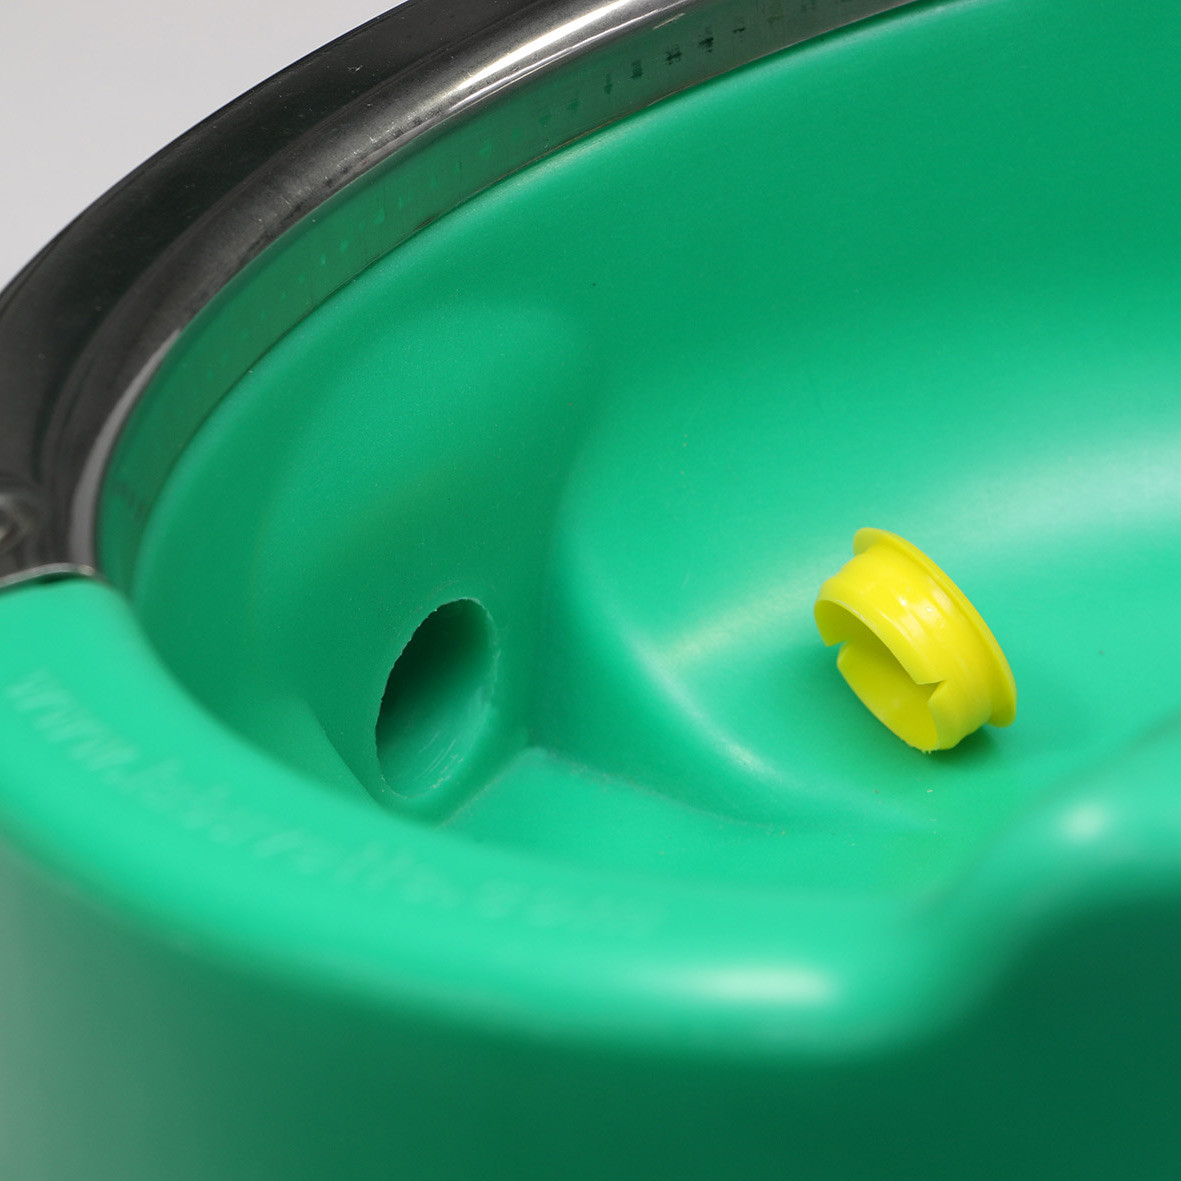 Easy cleaning with drain plug removable without tool